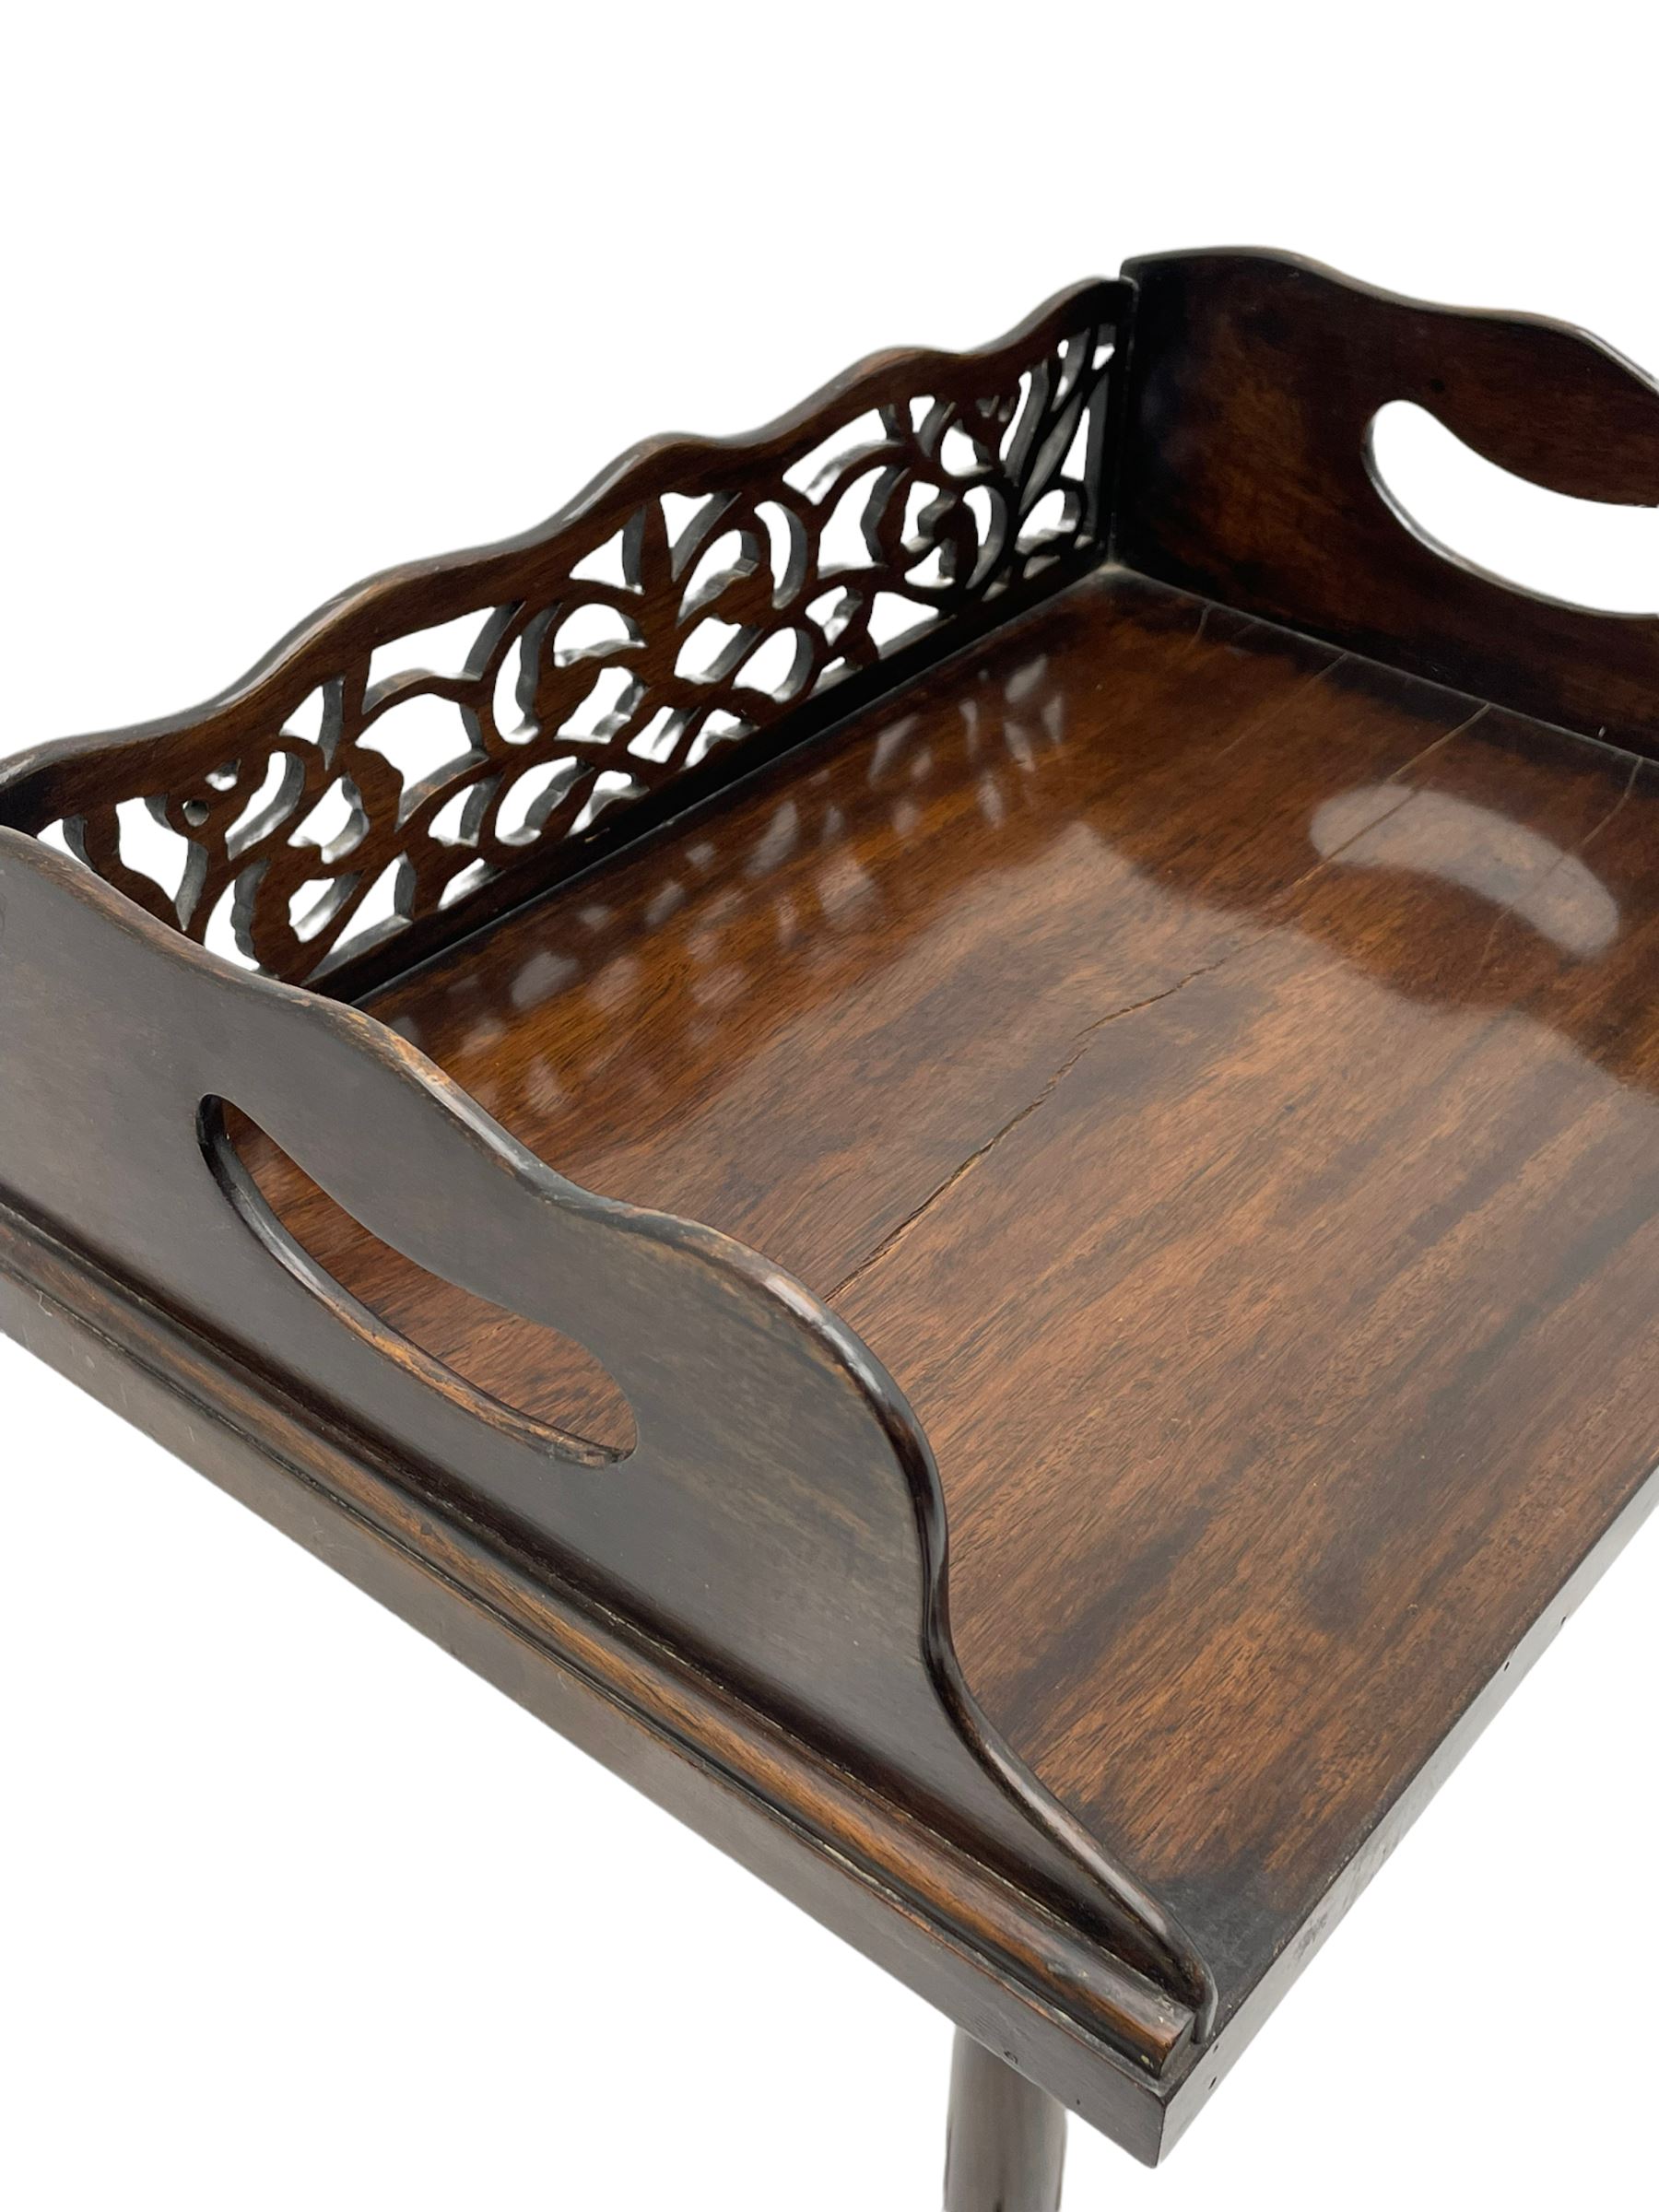 Regency style hardwood book tray on stand - Image 3 of 7